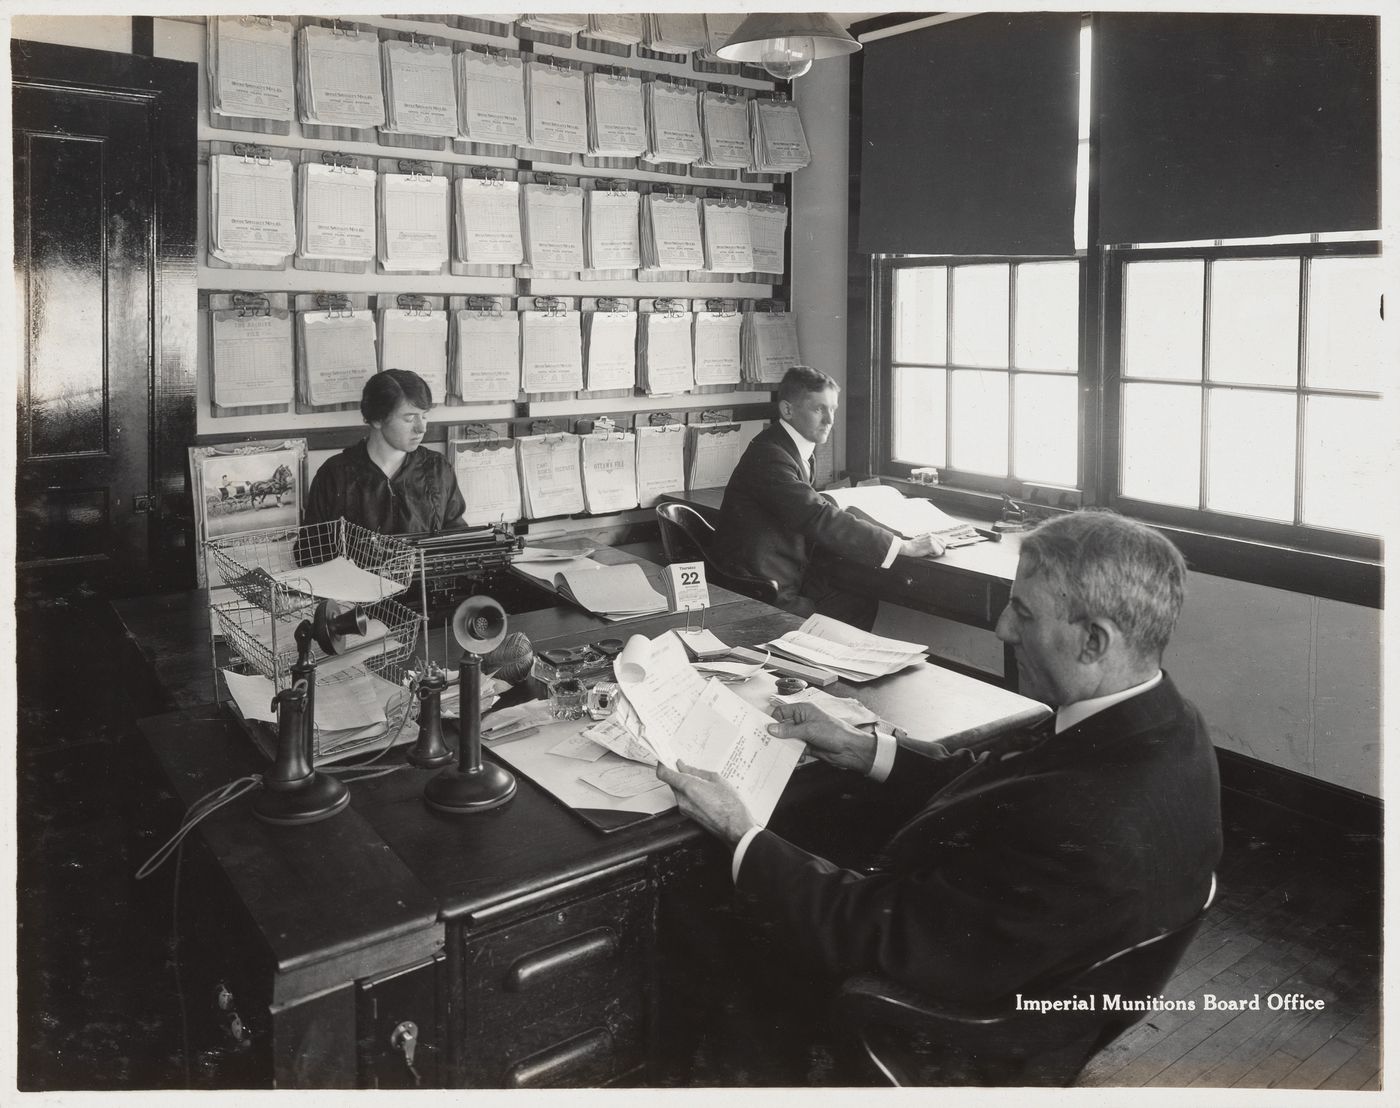 Interior view of imperial munitions board office at the Energite Explosives Plant No. 3, the Shell Loading Plant, Renfrew, Ontario, Canada